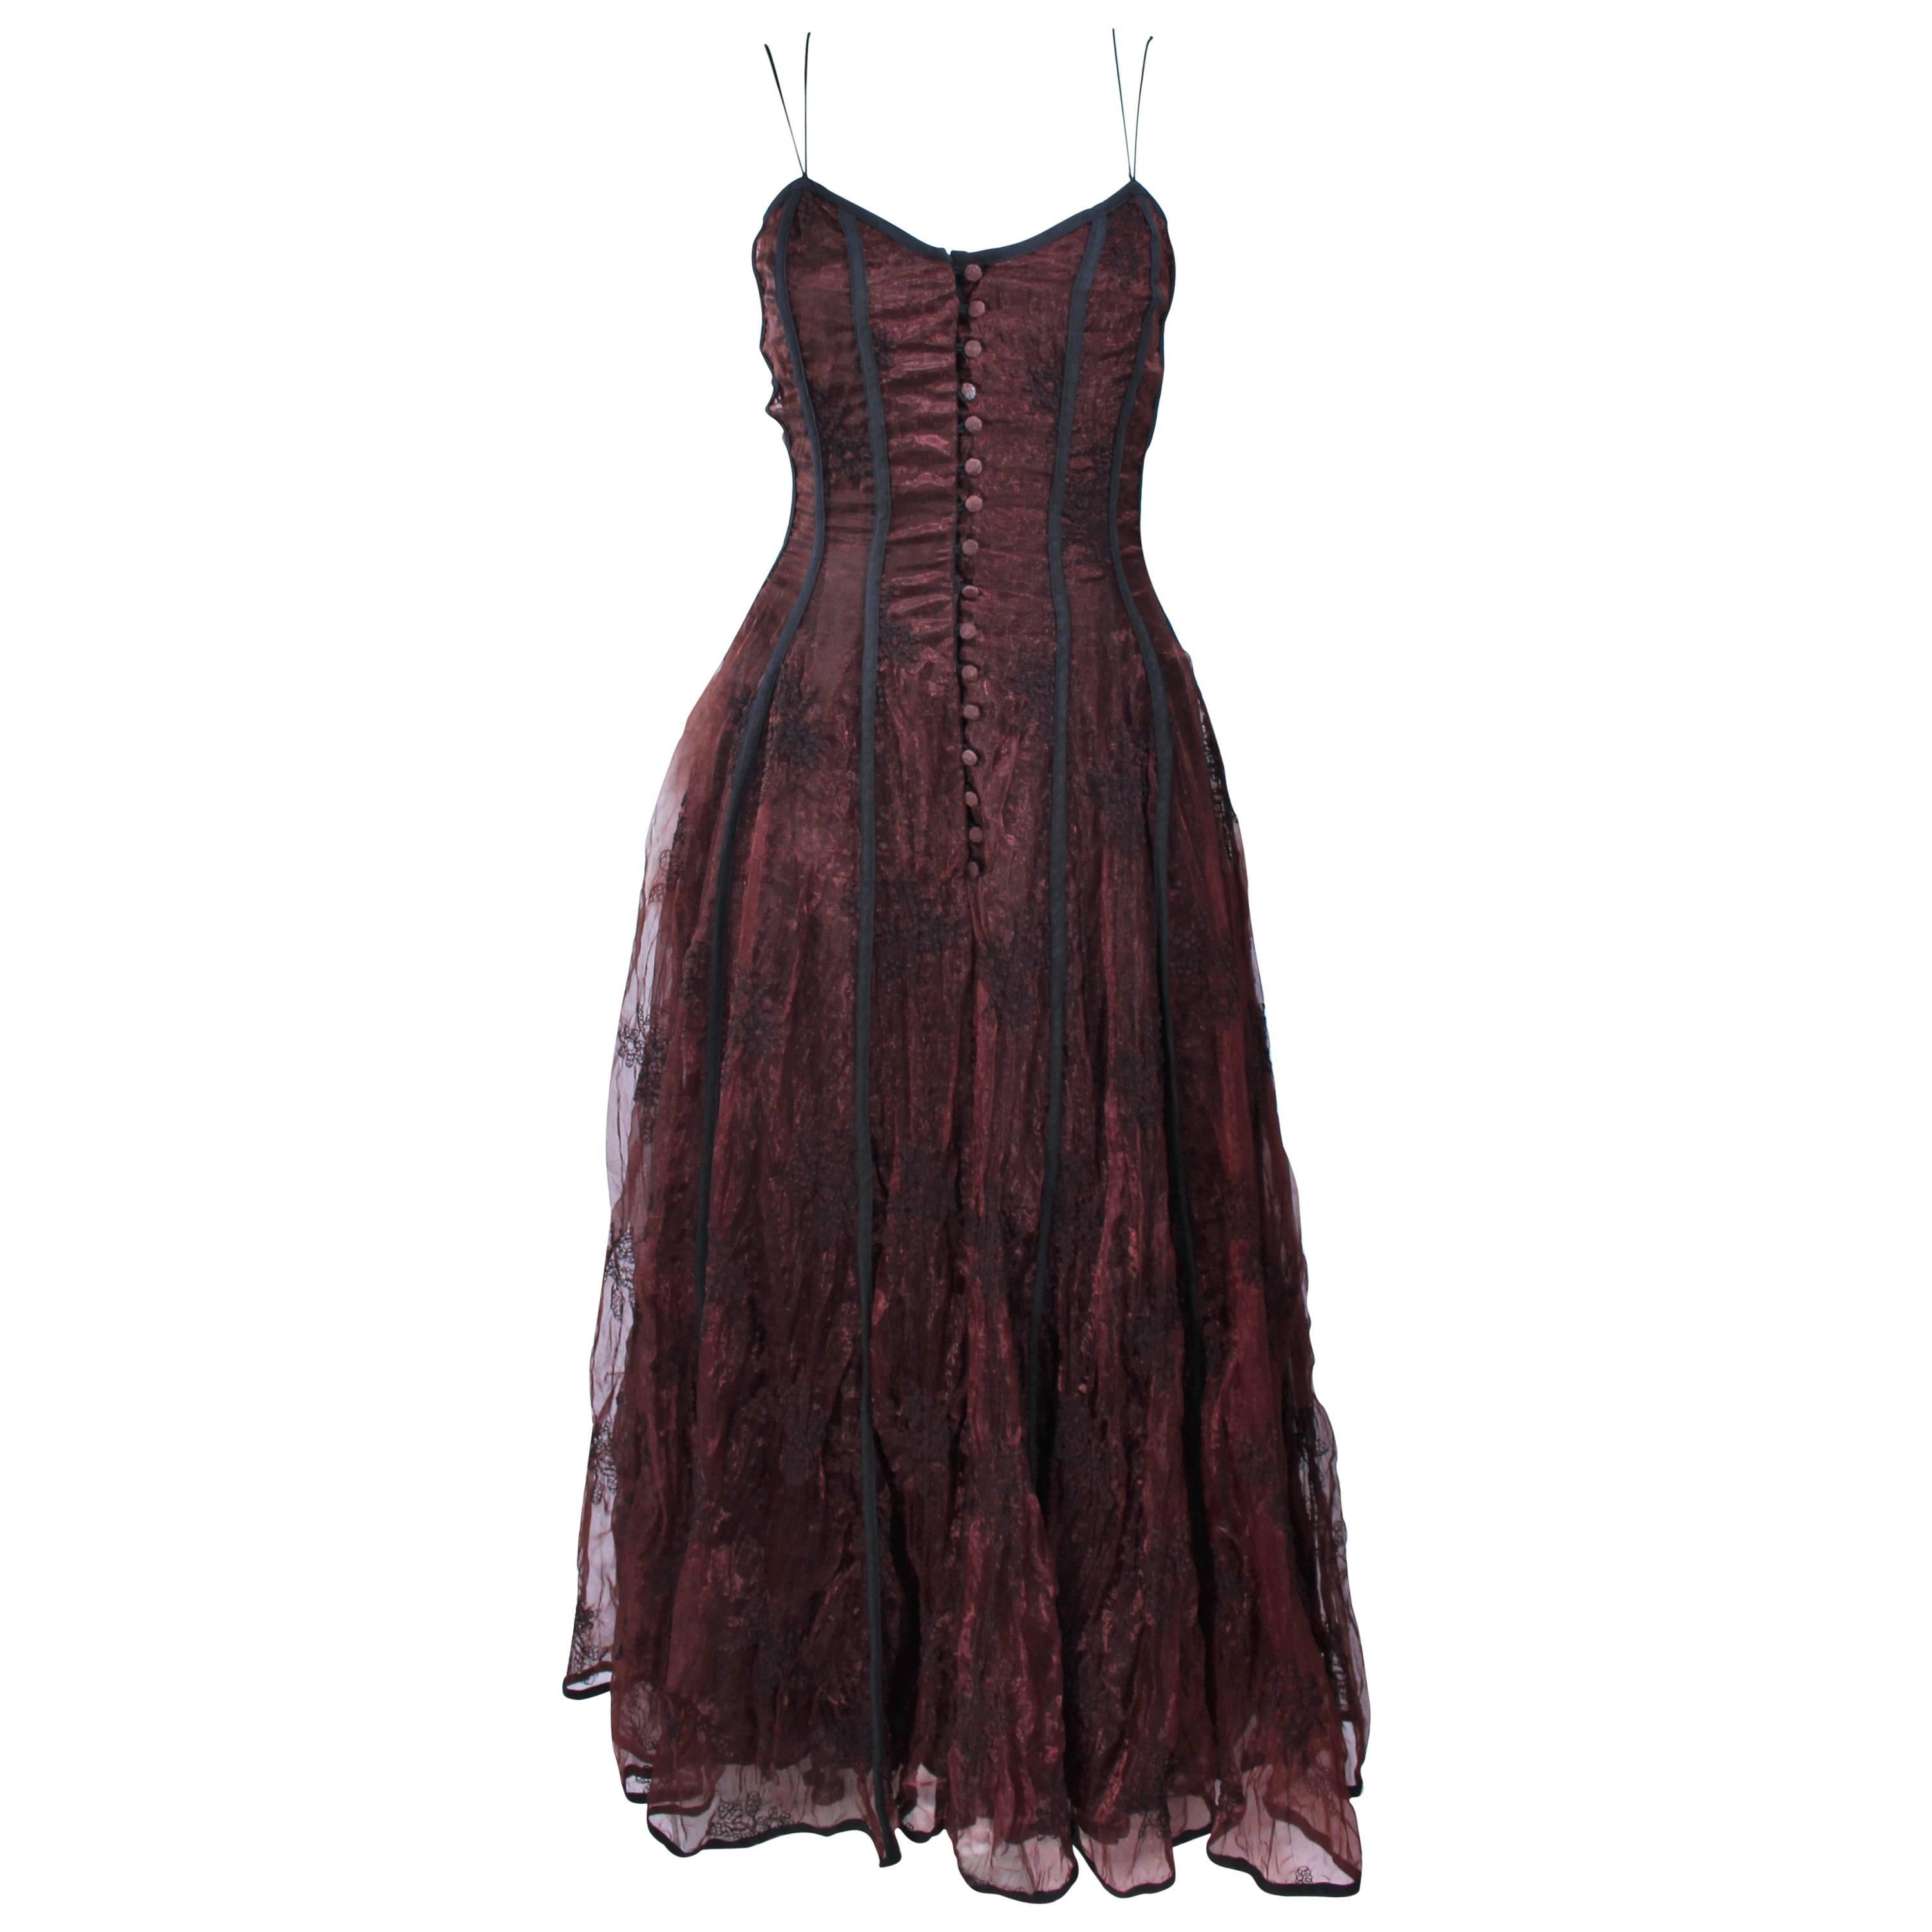 KAAT TILLY Brown Crinkled Lace Corset Lace Gown Size 36 For Sale